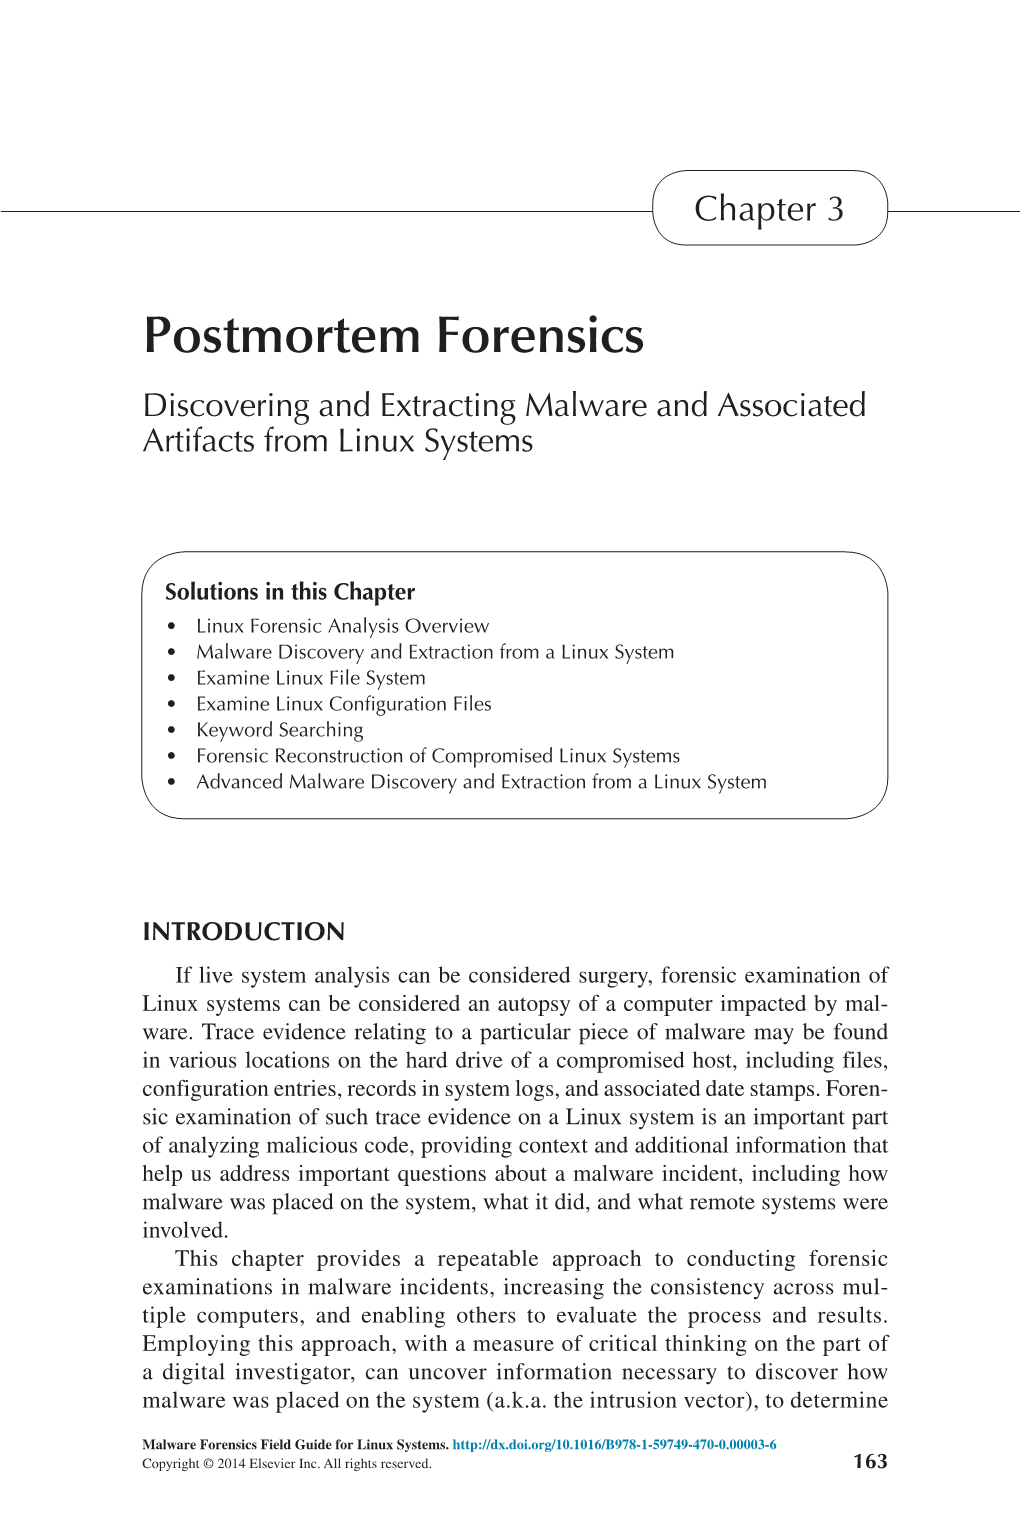 Malware Forensics Field Guide for Linux Systems: Digital Forensics